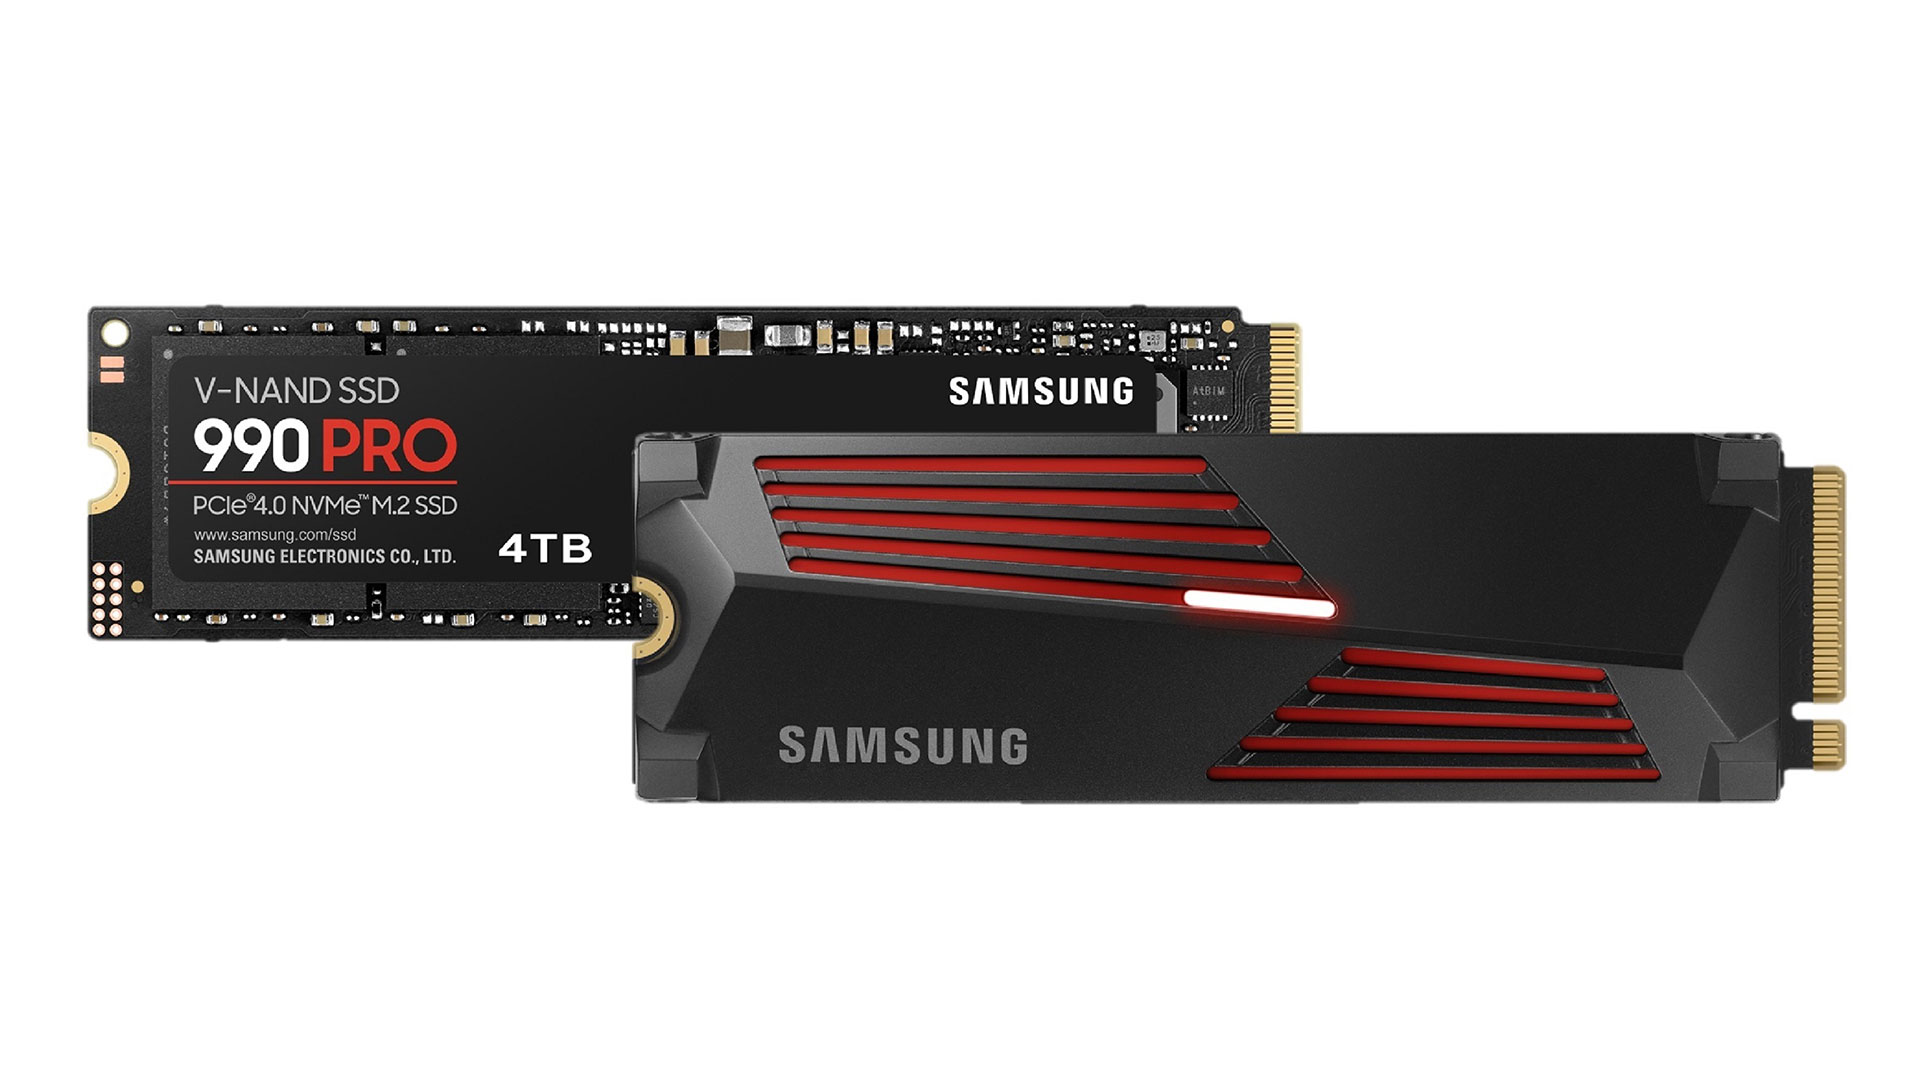 The Samsung 990 PRO Series SSD lineup now has a 4TB offering